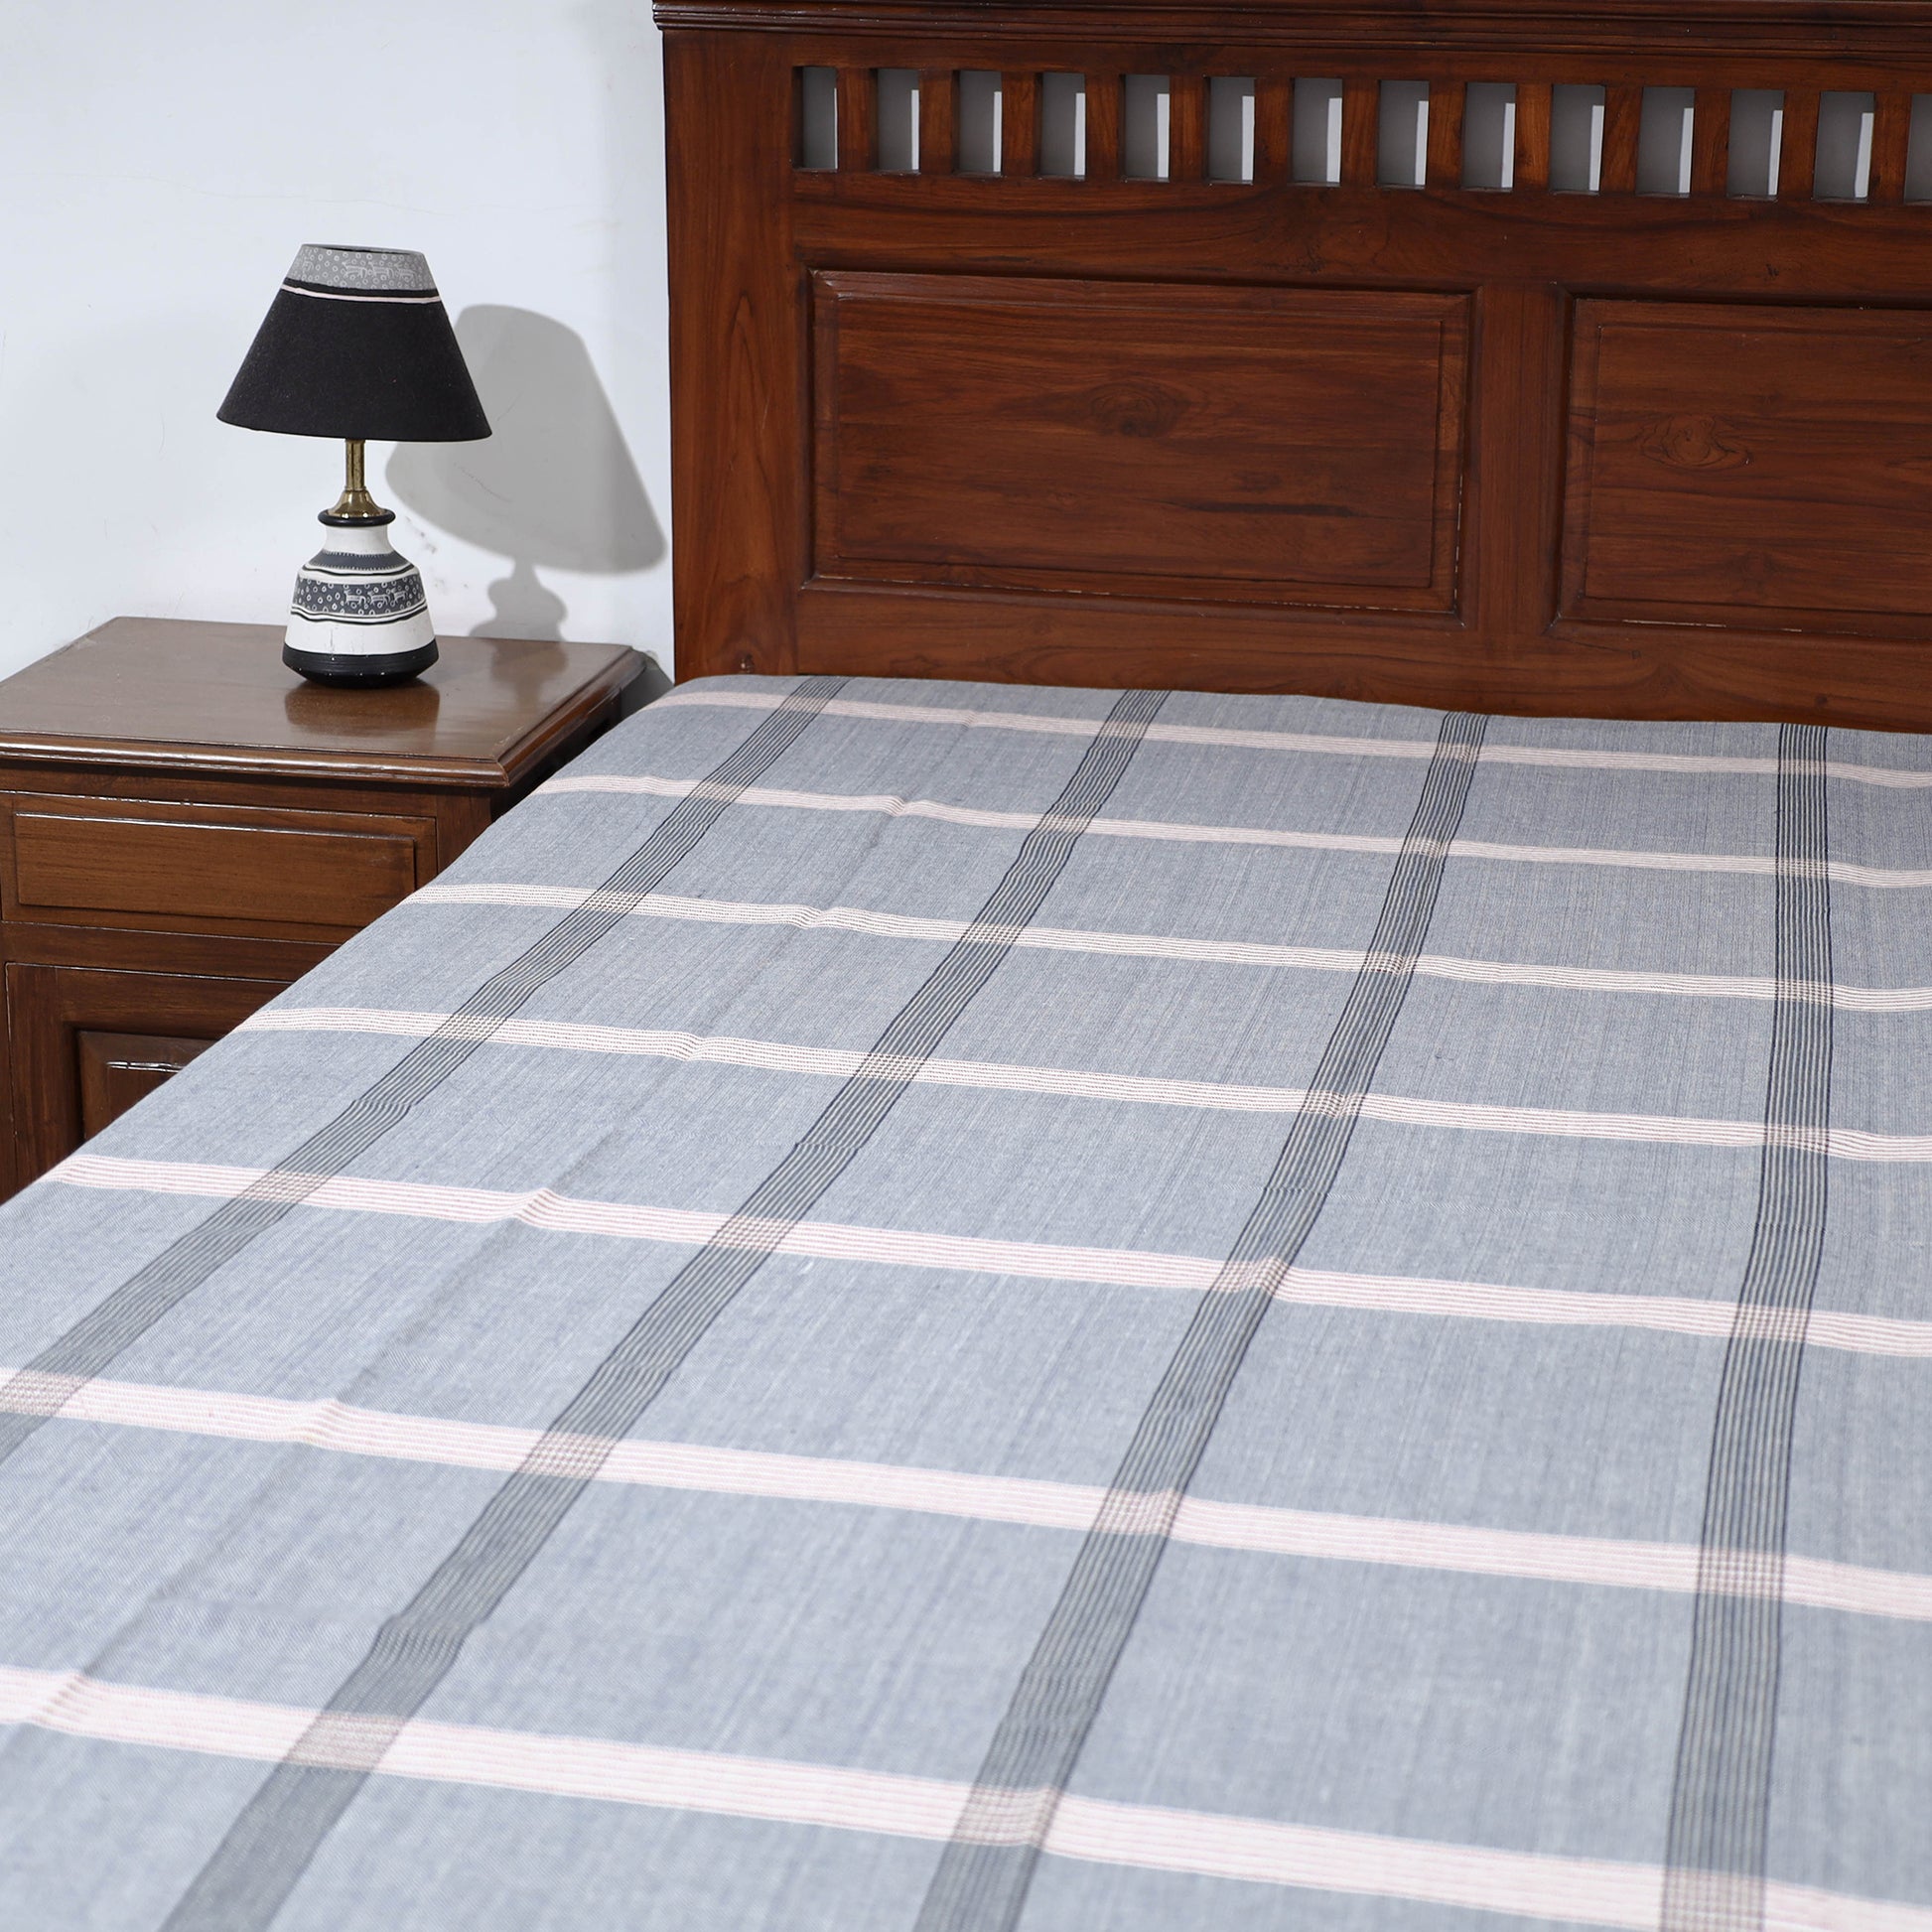 Cotton Single Bed Cover